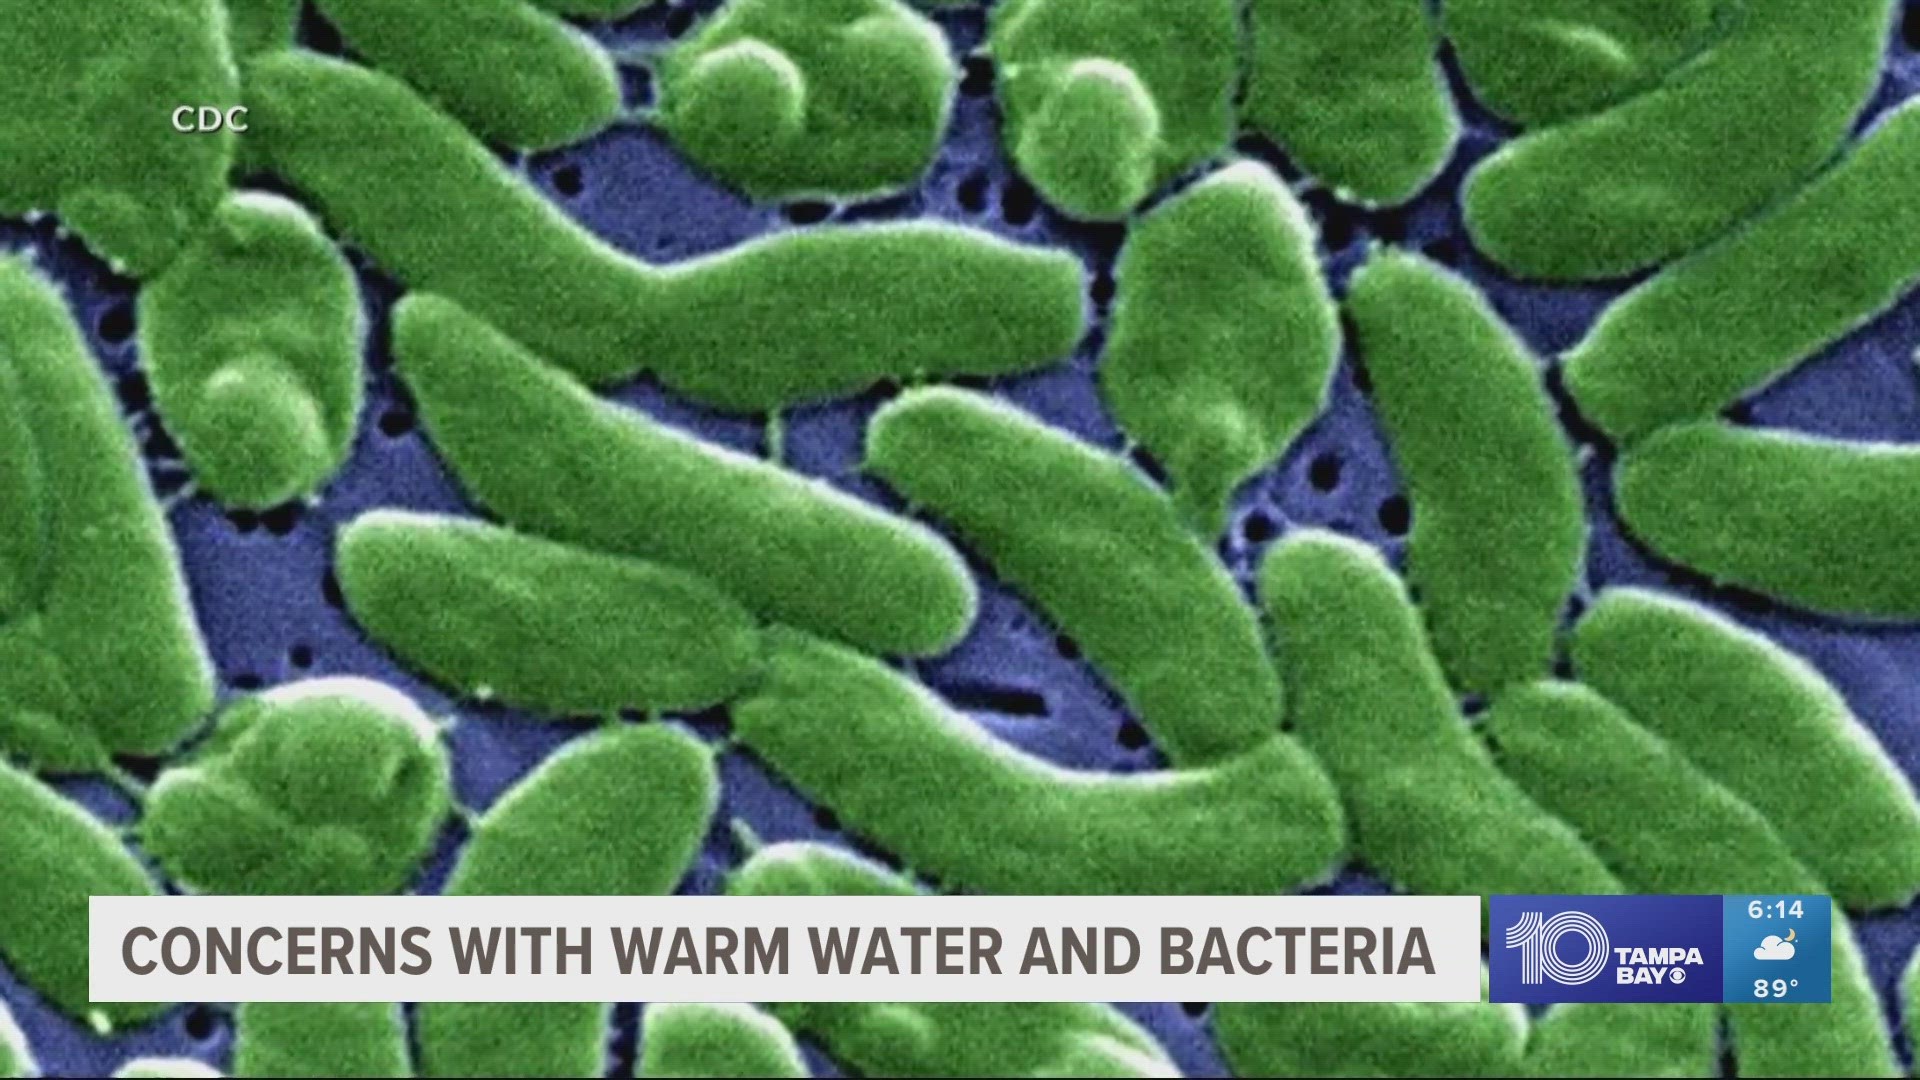 Among the rare bacteria that thrive in such conditions include Vibrio vulnificus.